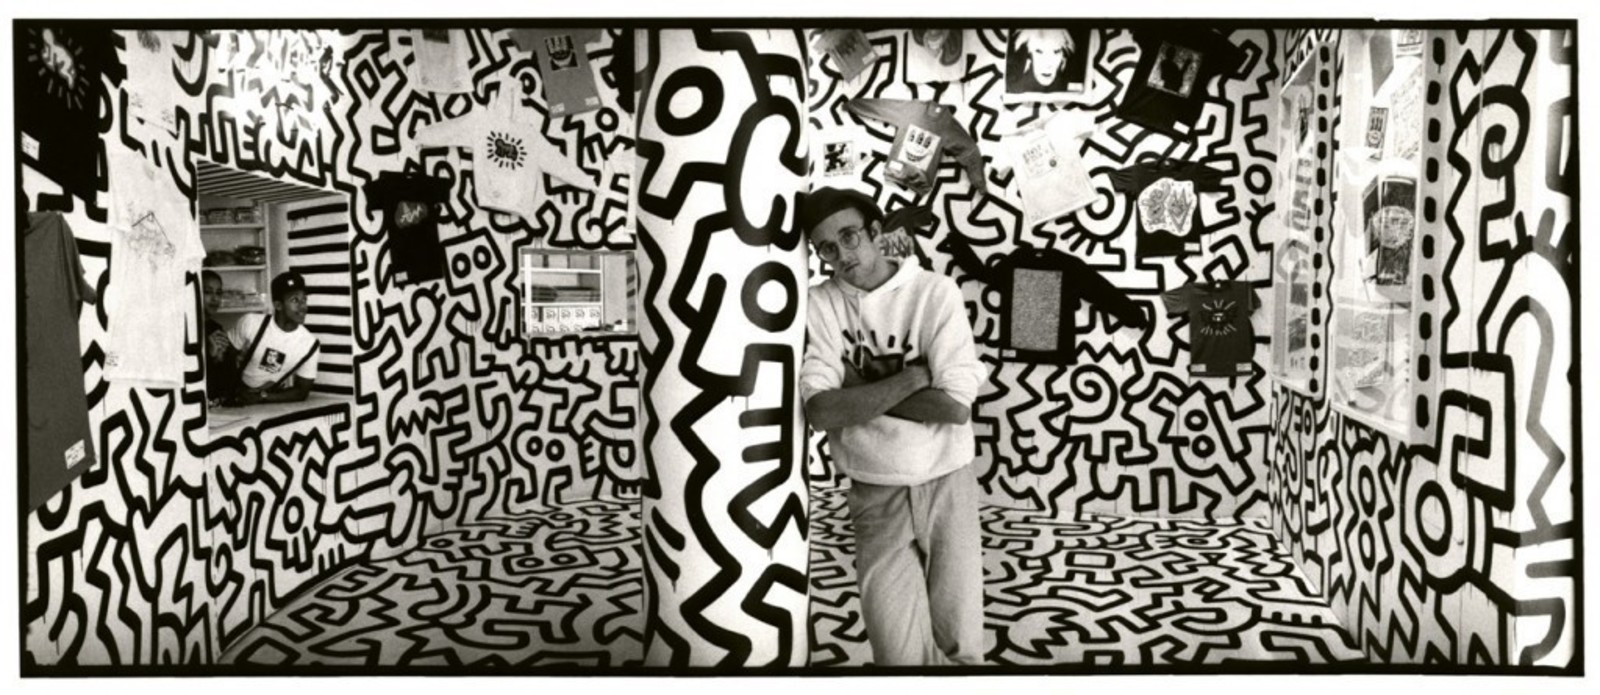 Keith Haring in his Pop Shop in New York City. 1986. &copy; Charles Dolfi-Michels/Keith Haring Foundation